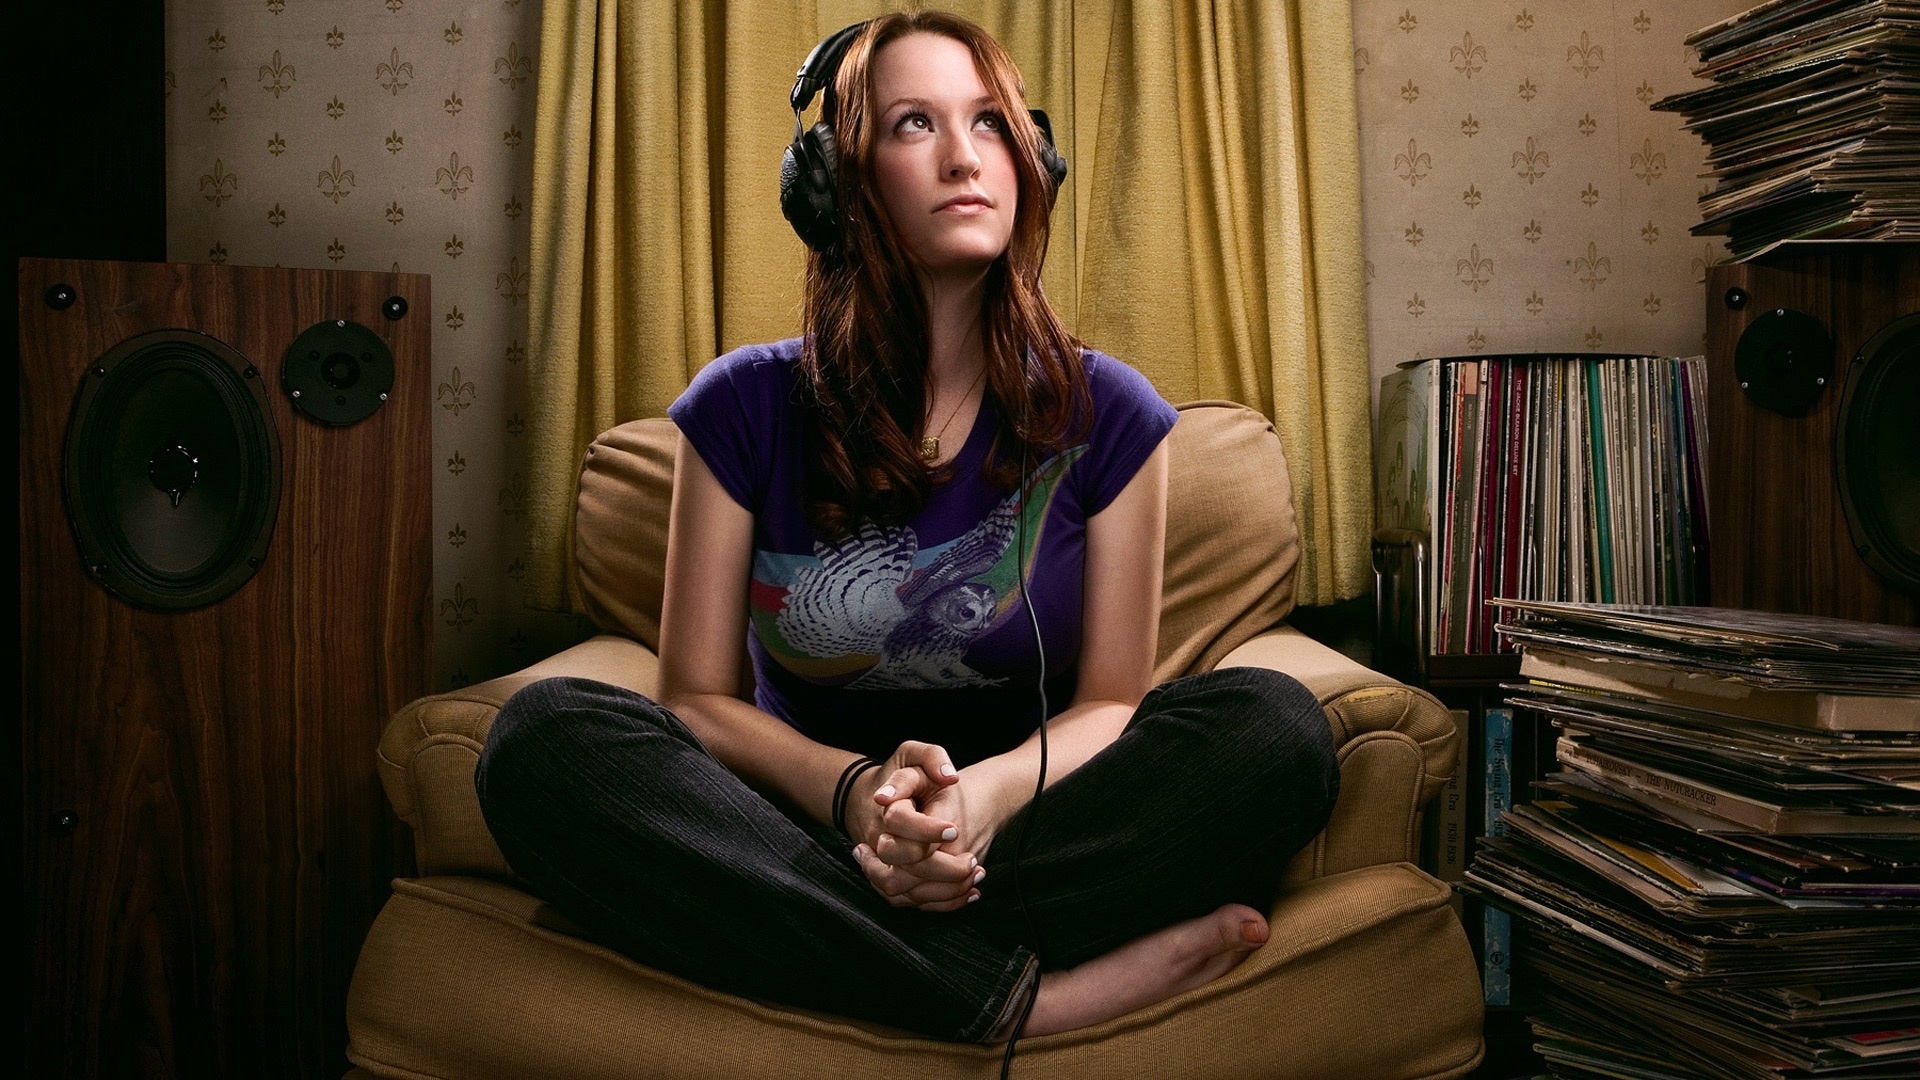 Ingrid Michaelson, TV show theme song, Melodic tunes, Captivating vocals, 1920x1080 Full HD Desktop